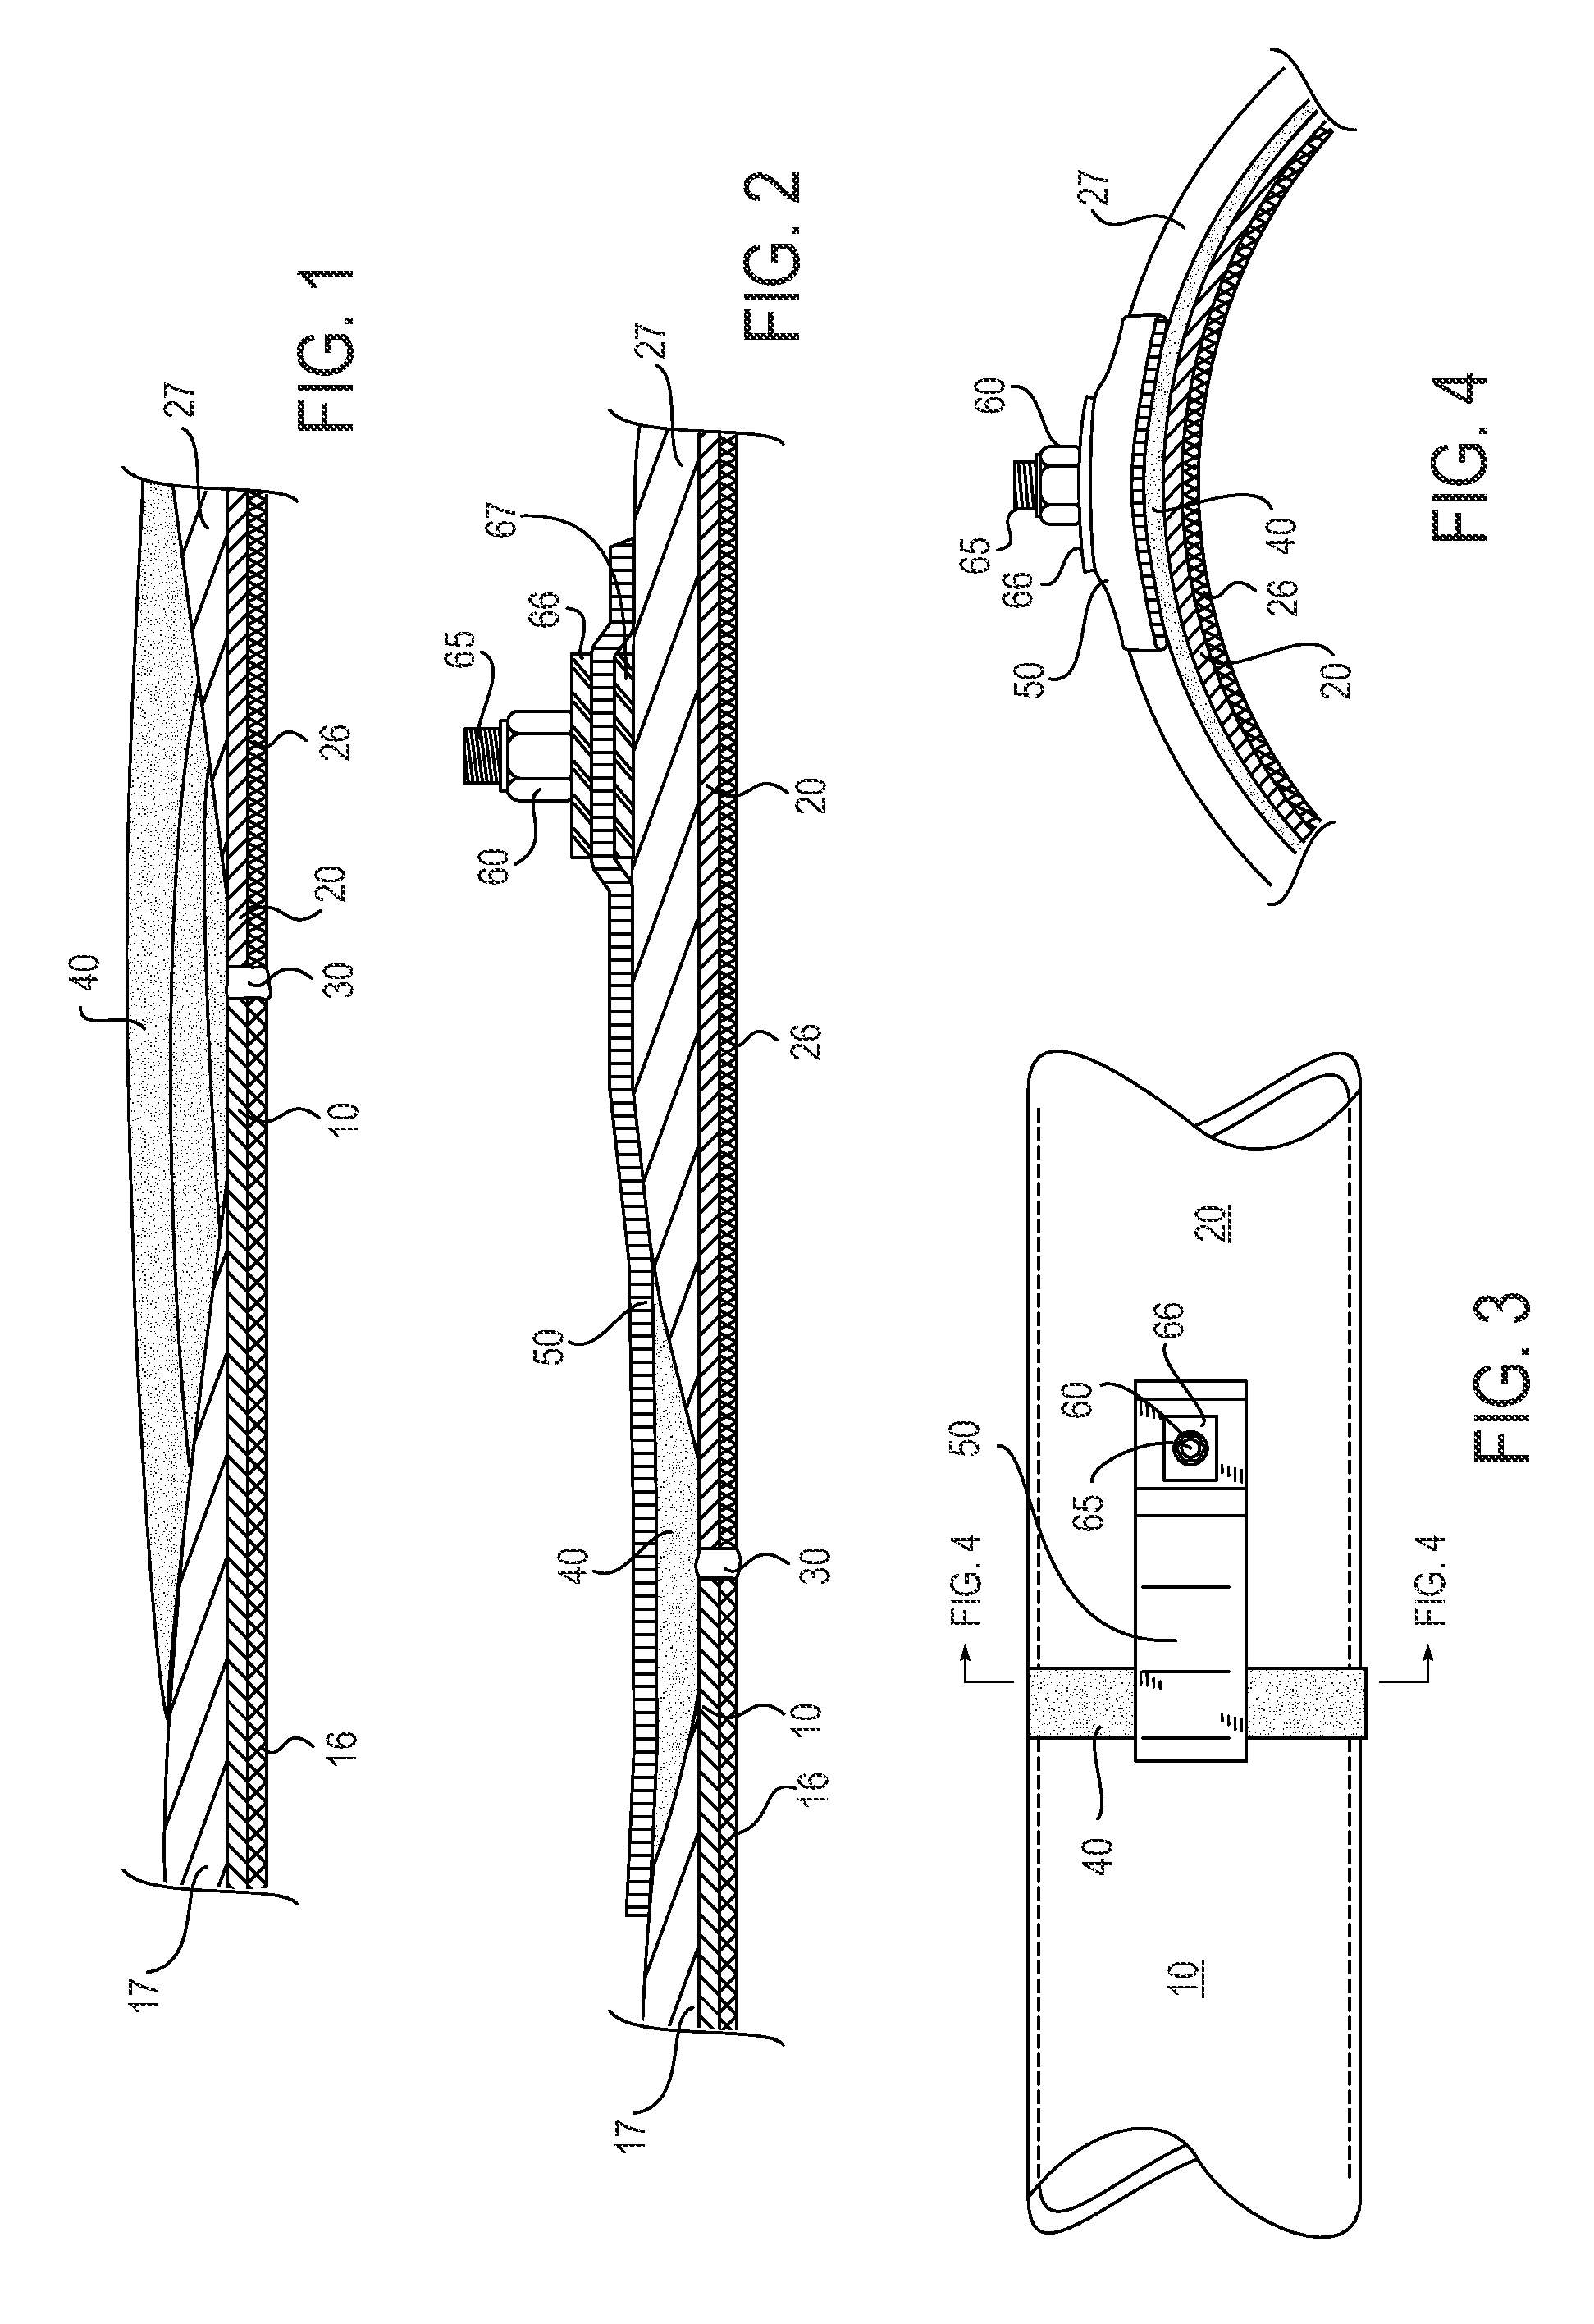 Static dissipation in composite structural components